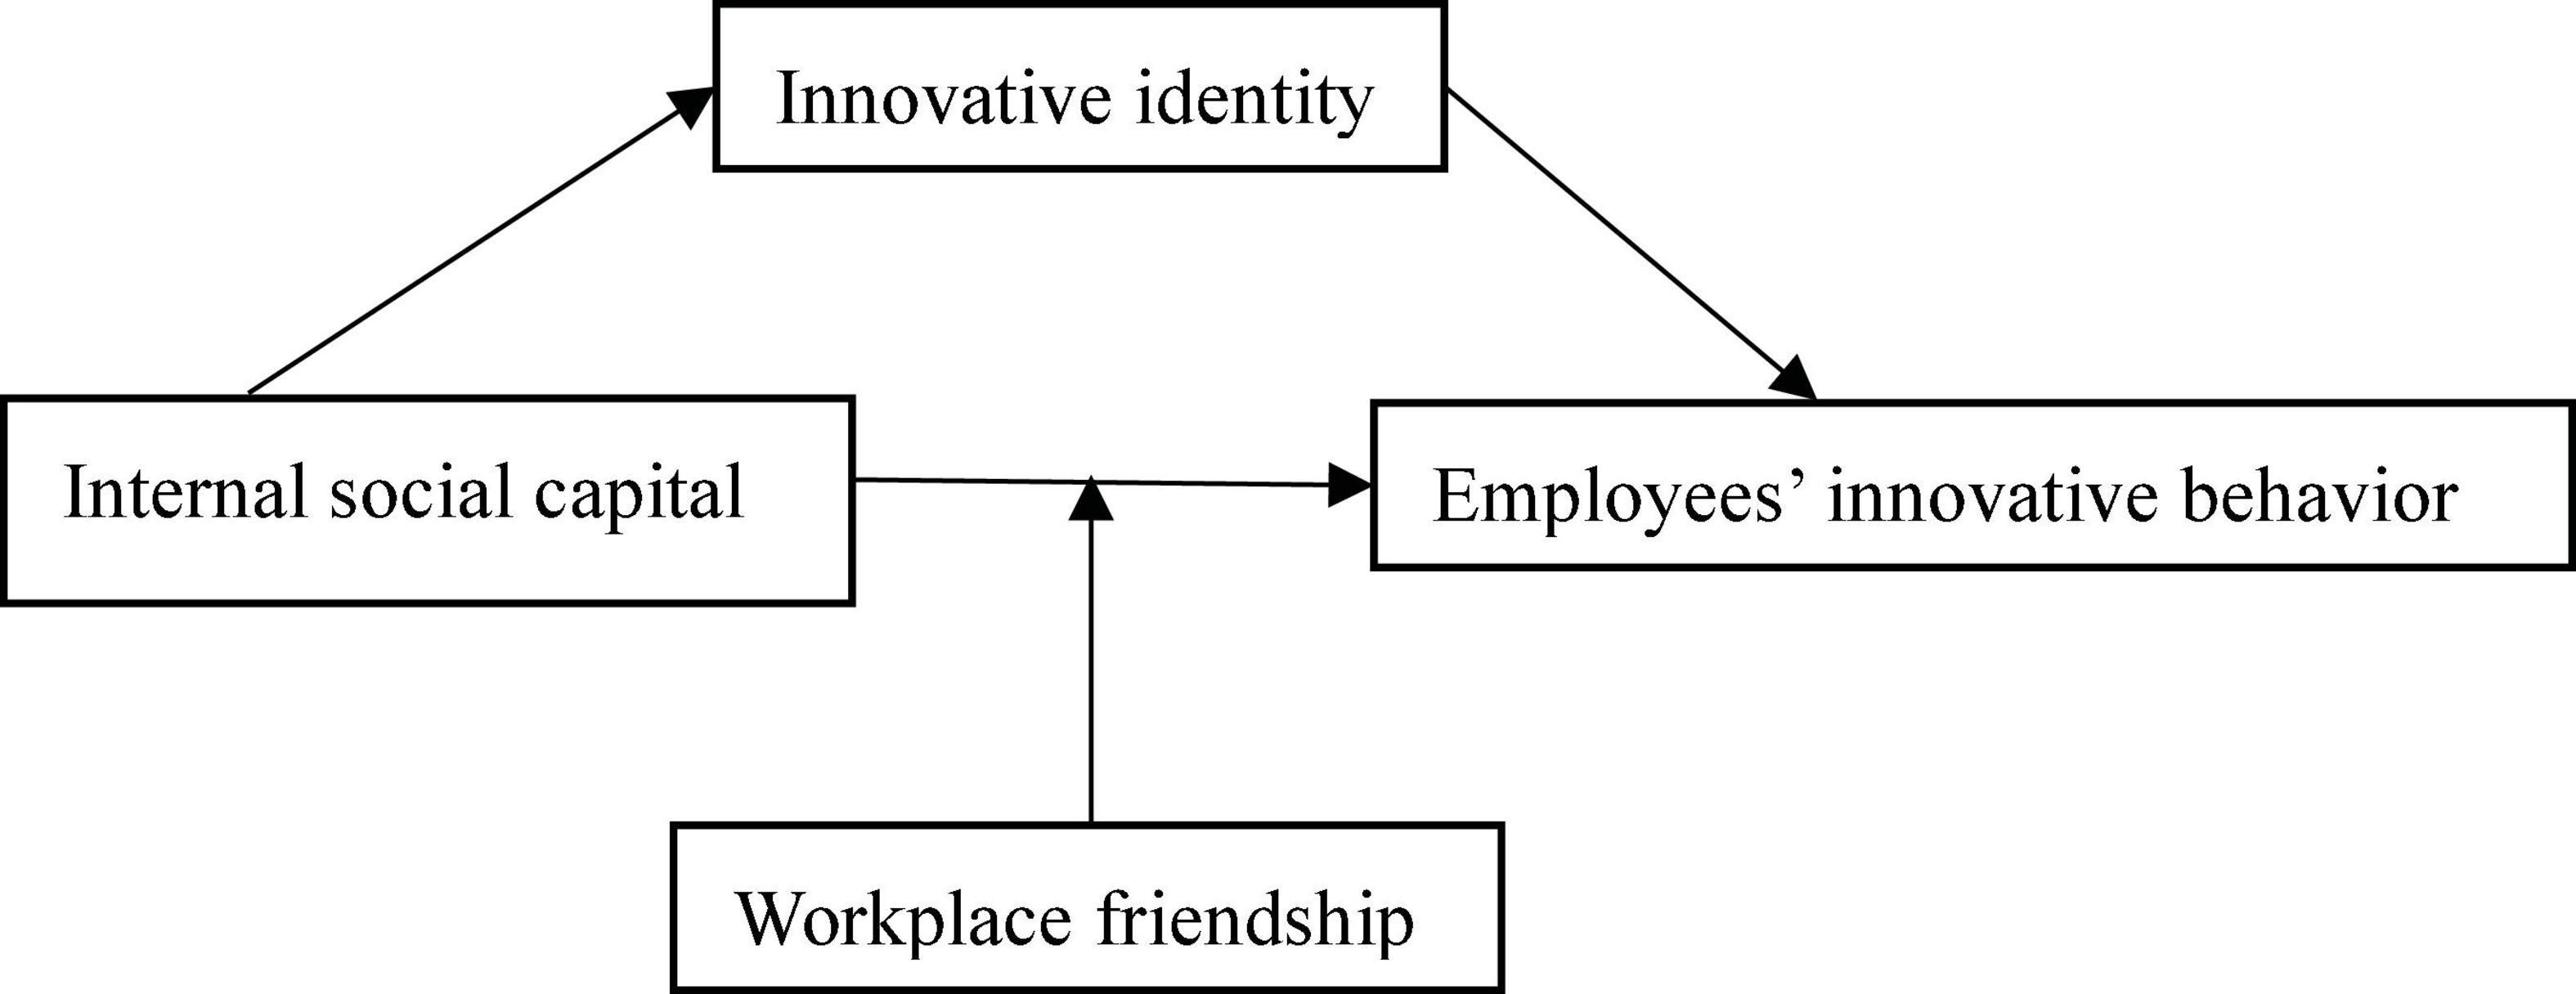 Frontiers | How to stimulate employees' innovative behavior 